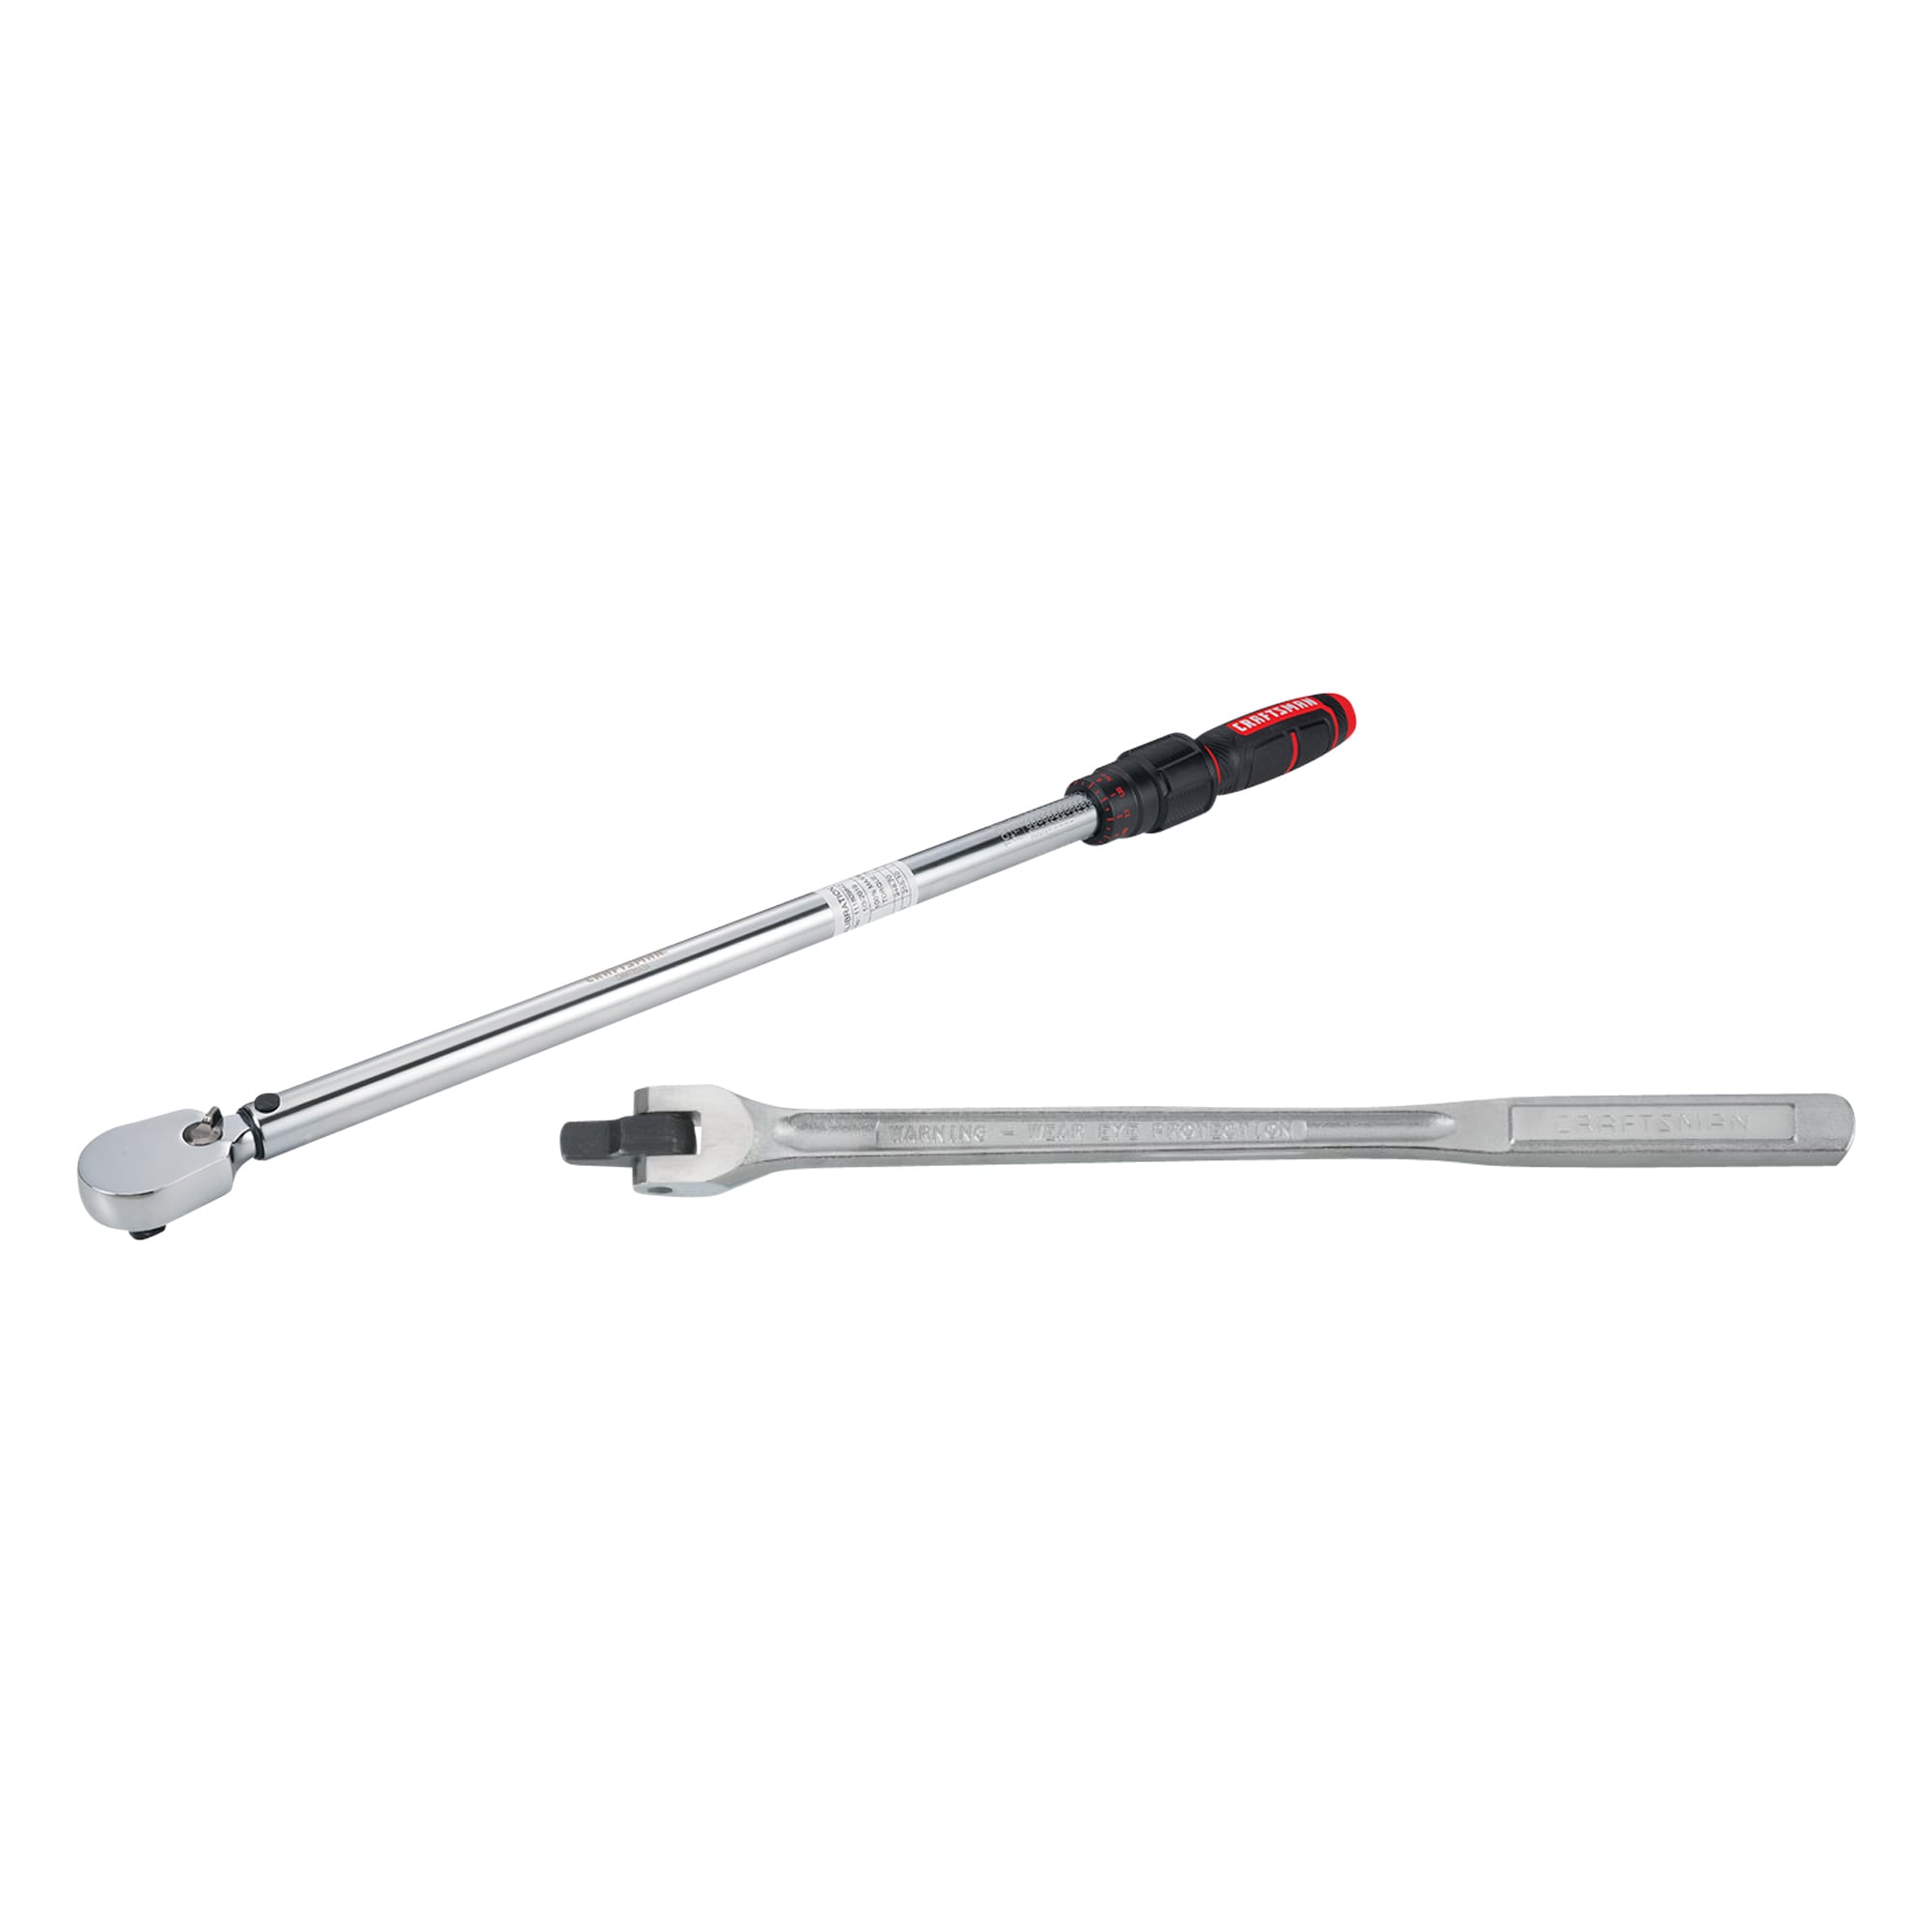 CRAFTSMAN 1/2-in Breaker Bar & 1/2-in Drive Click Torque Wrench (50-ft lb to 250-ft lb)